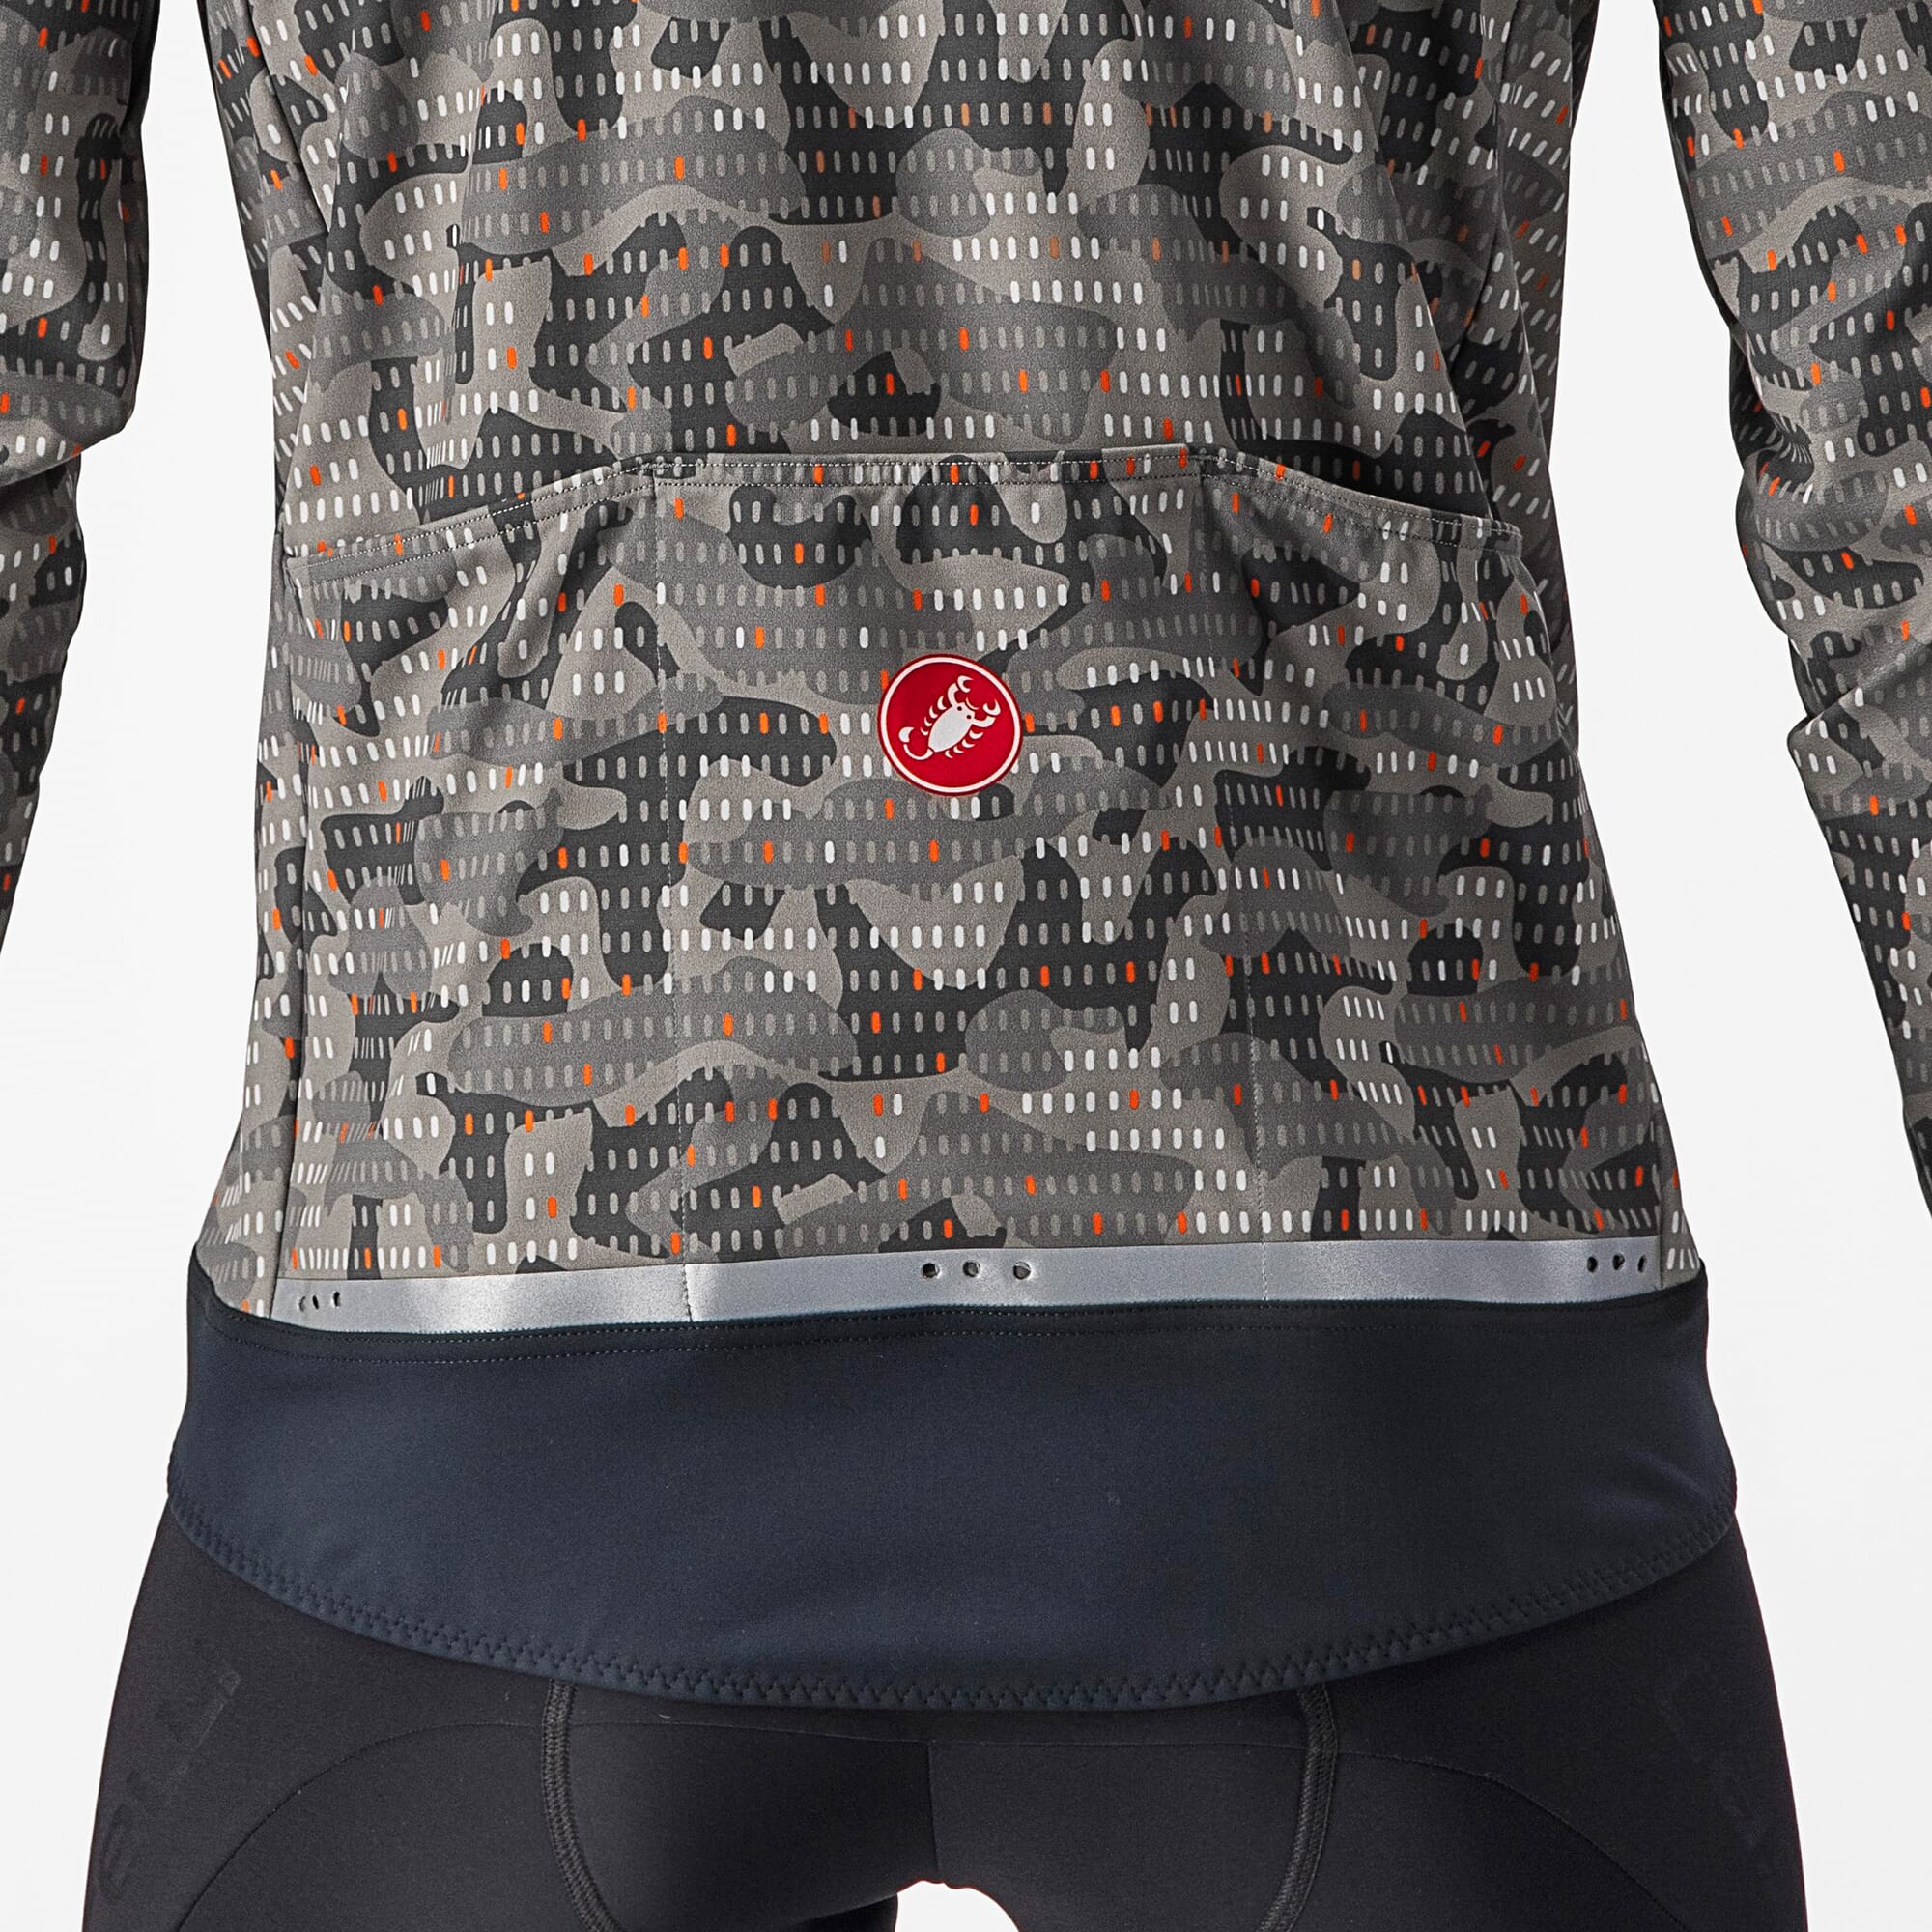 CASTELLI UNLIMITED PERFETTO ROS 2 JACKET